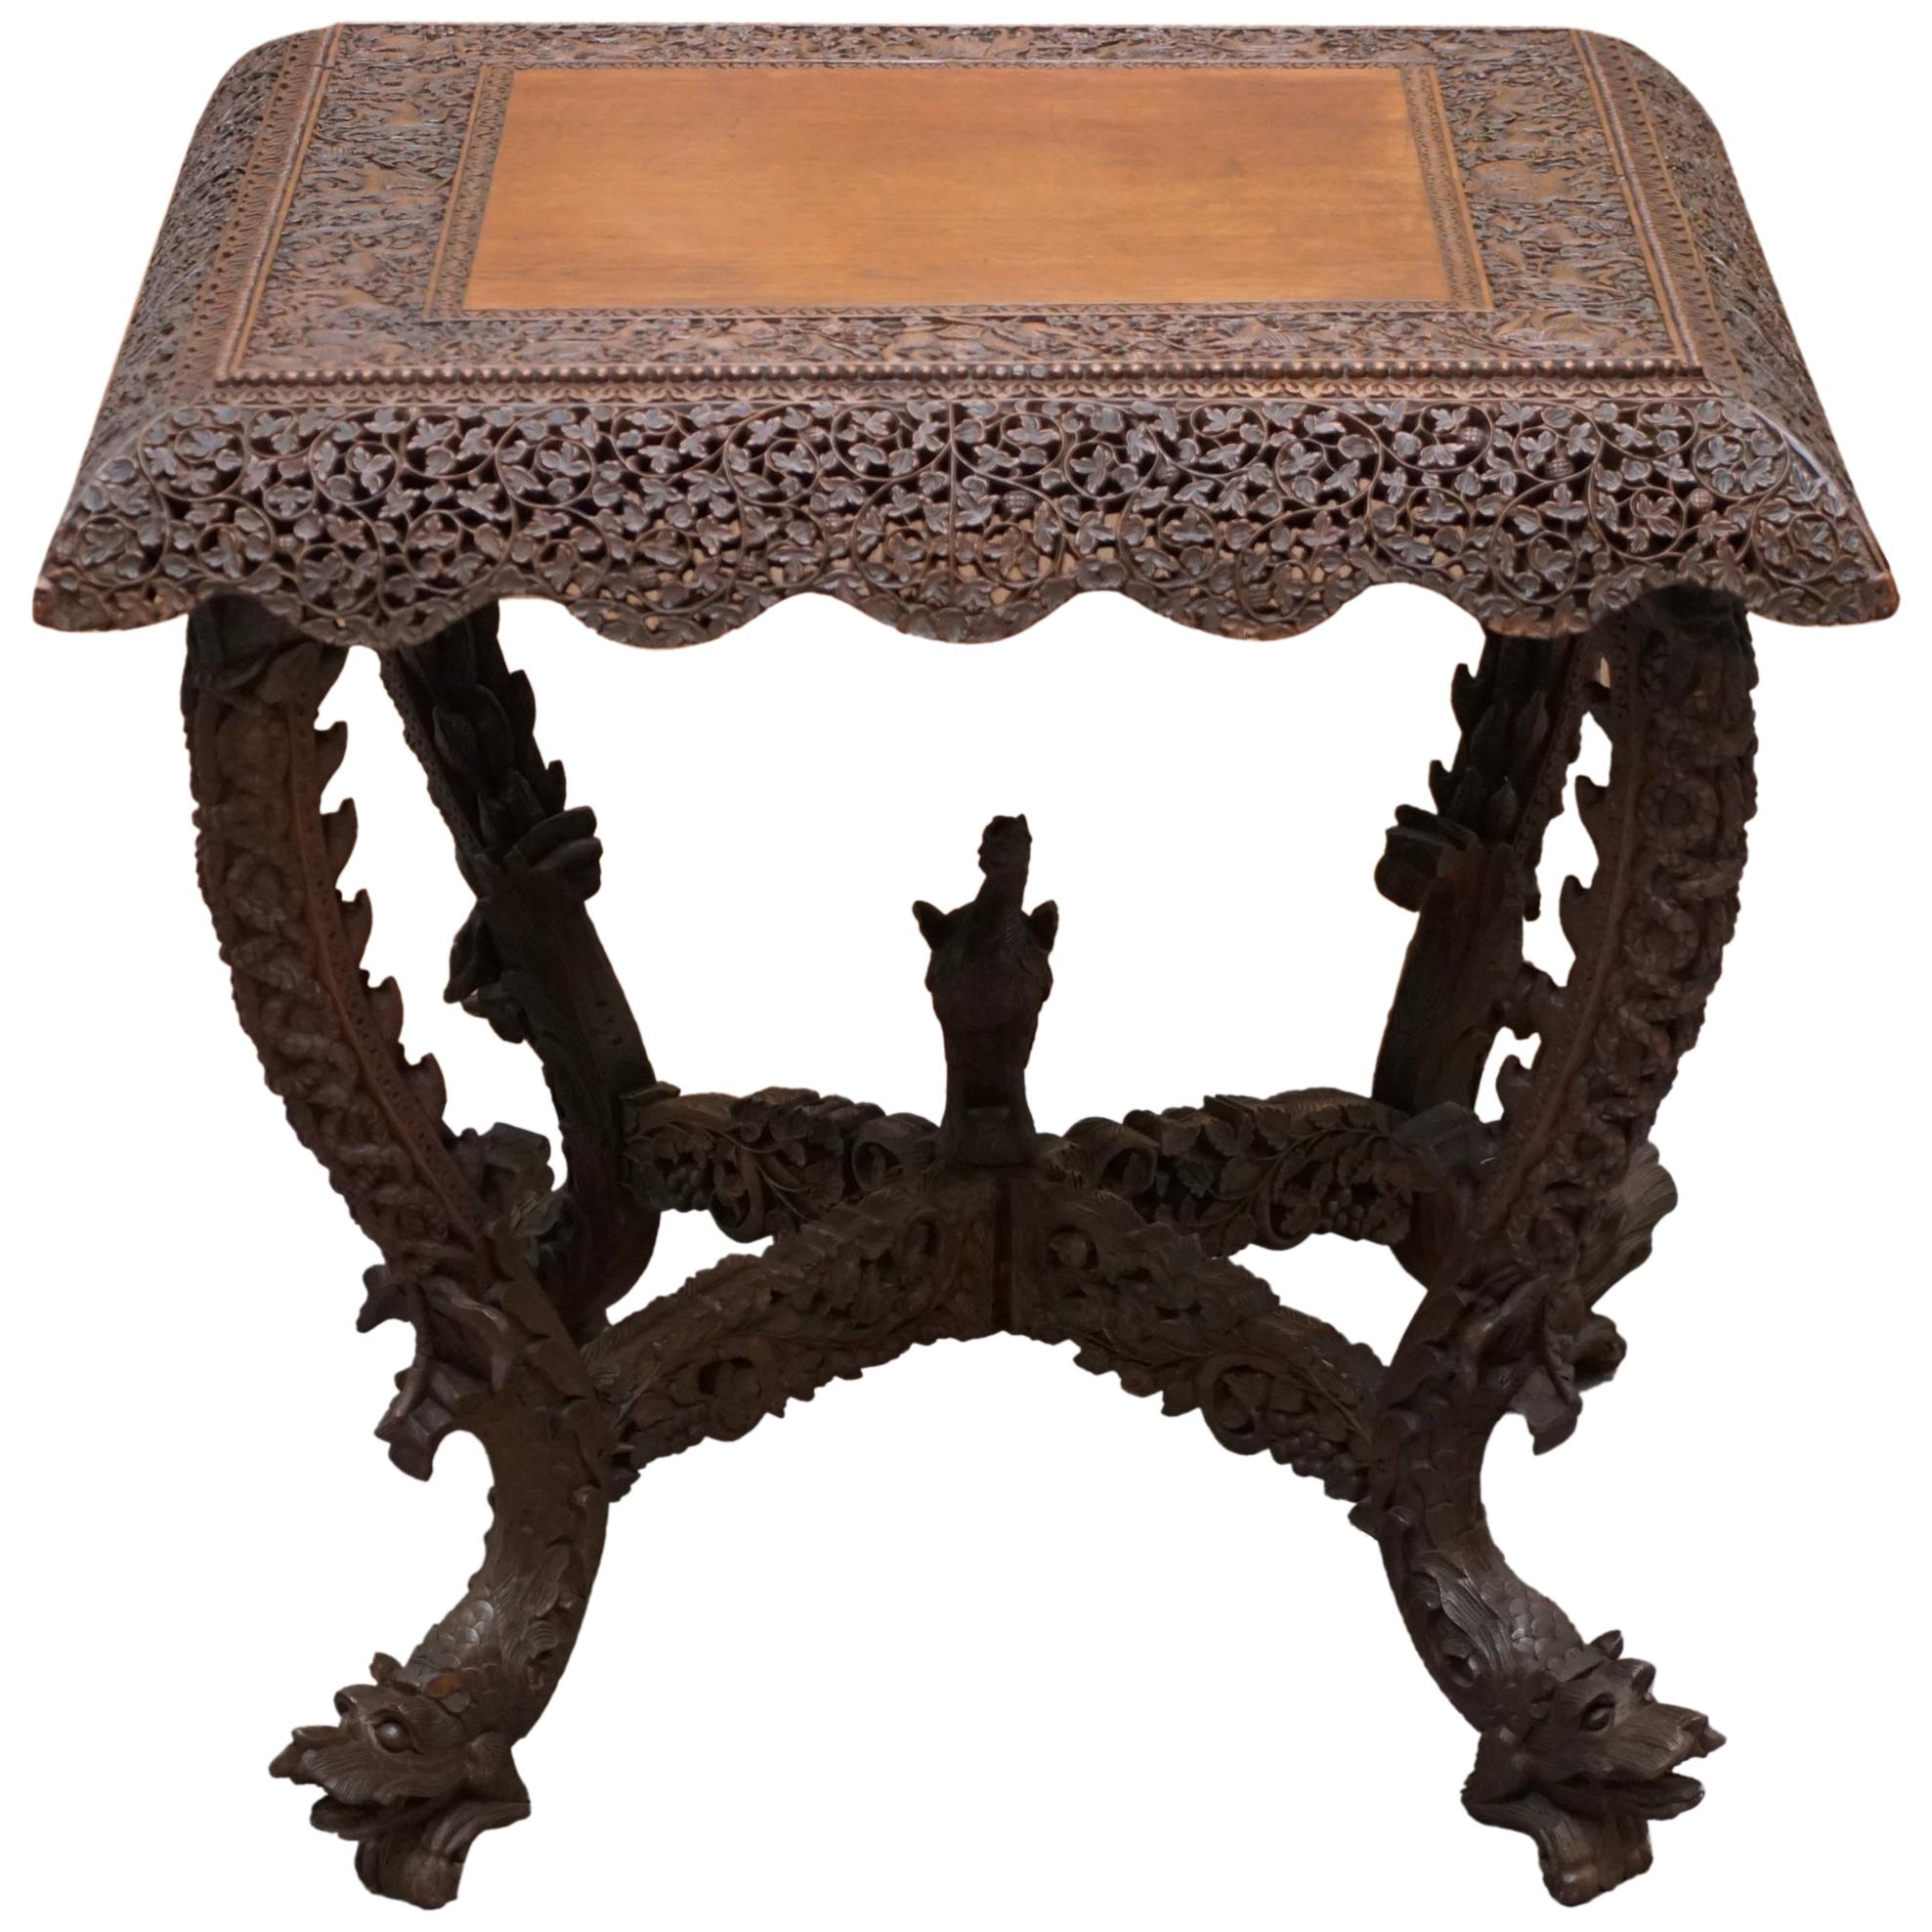 Rare Burmese circa 1880 Anglo Indian Hardwood Square Centre Occasional Table